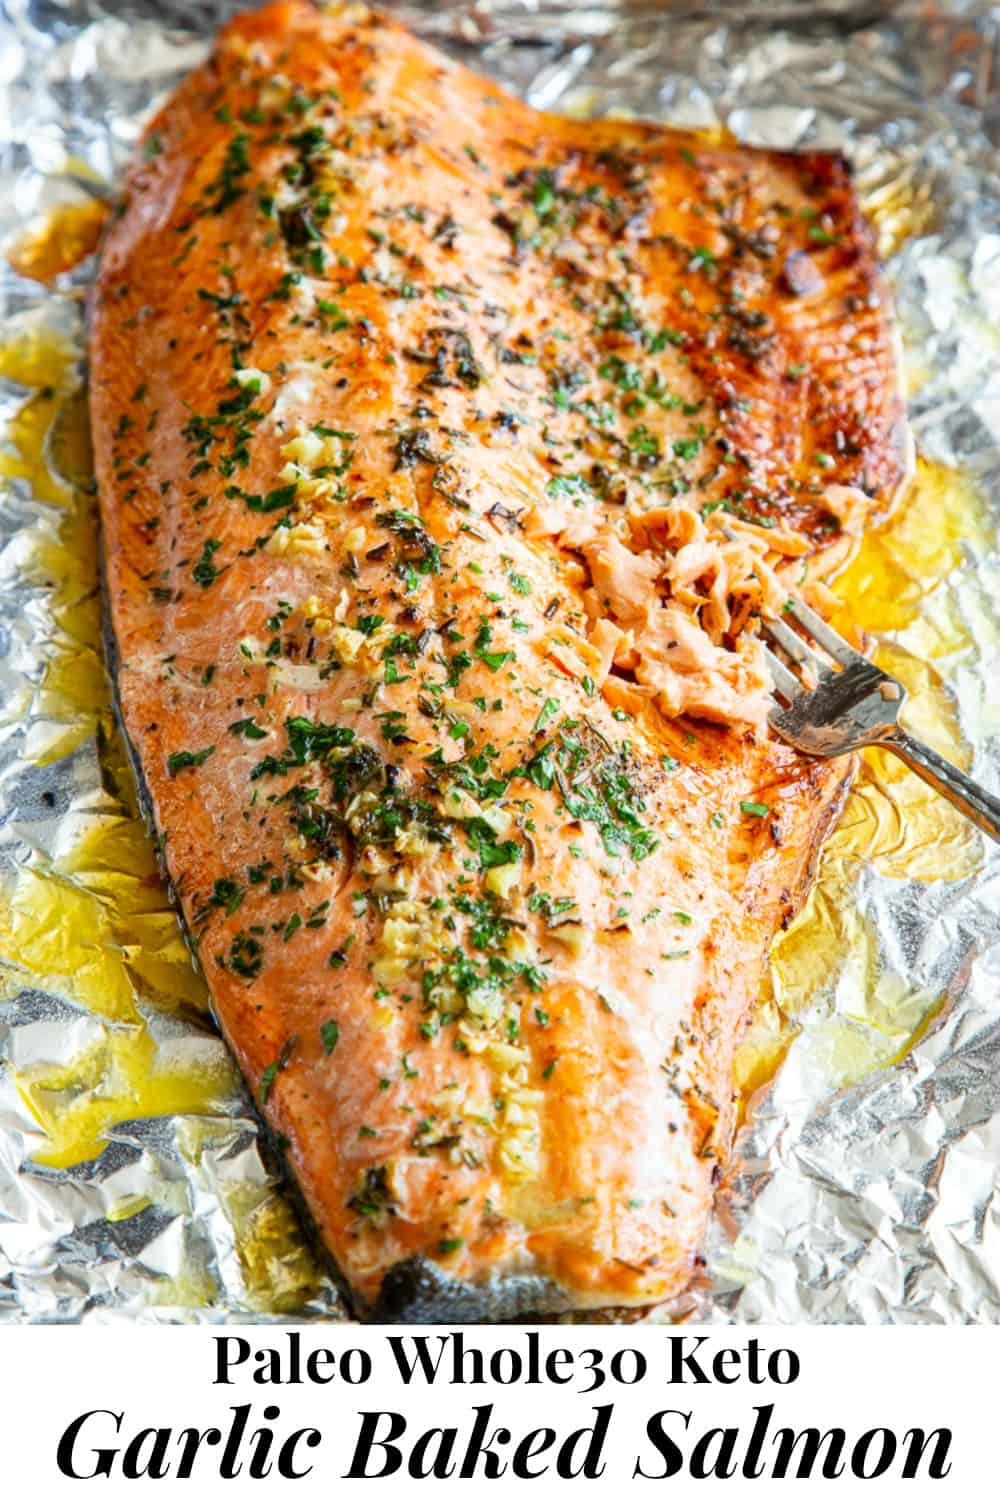 Baked Salmon In Foil With Garlic